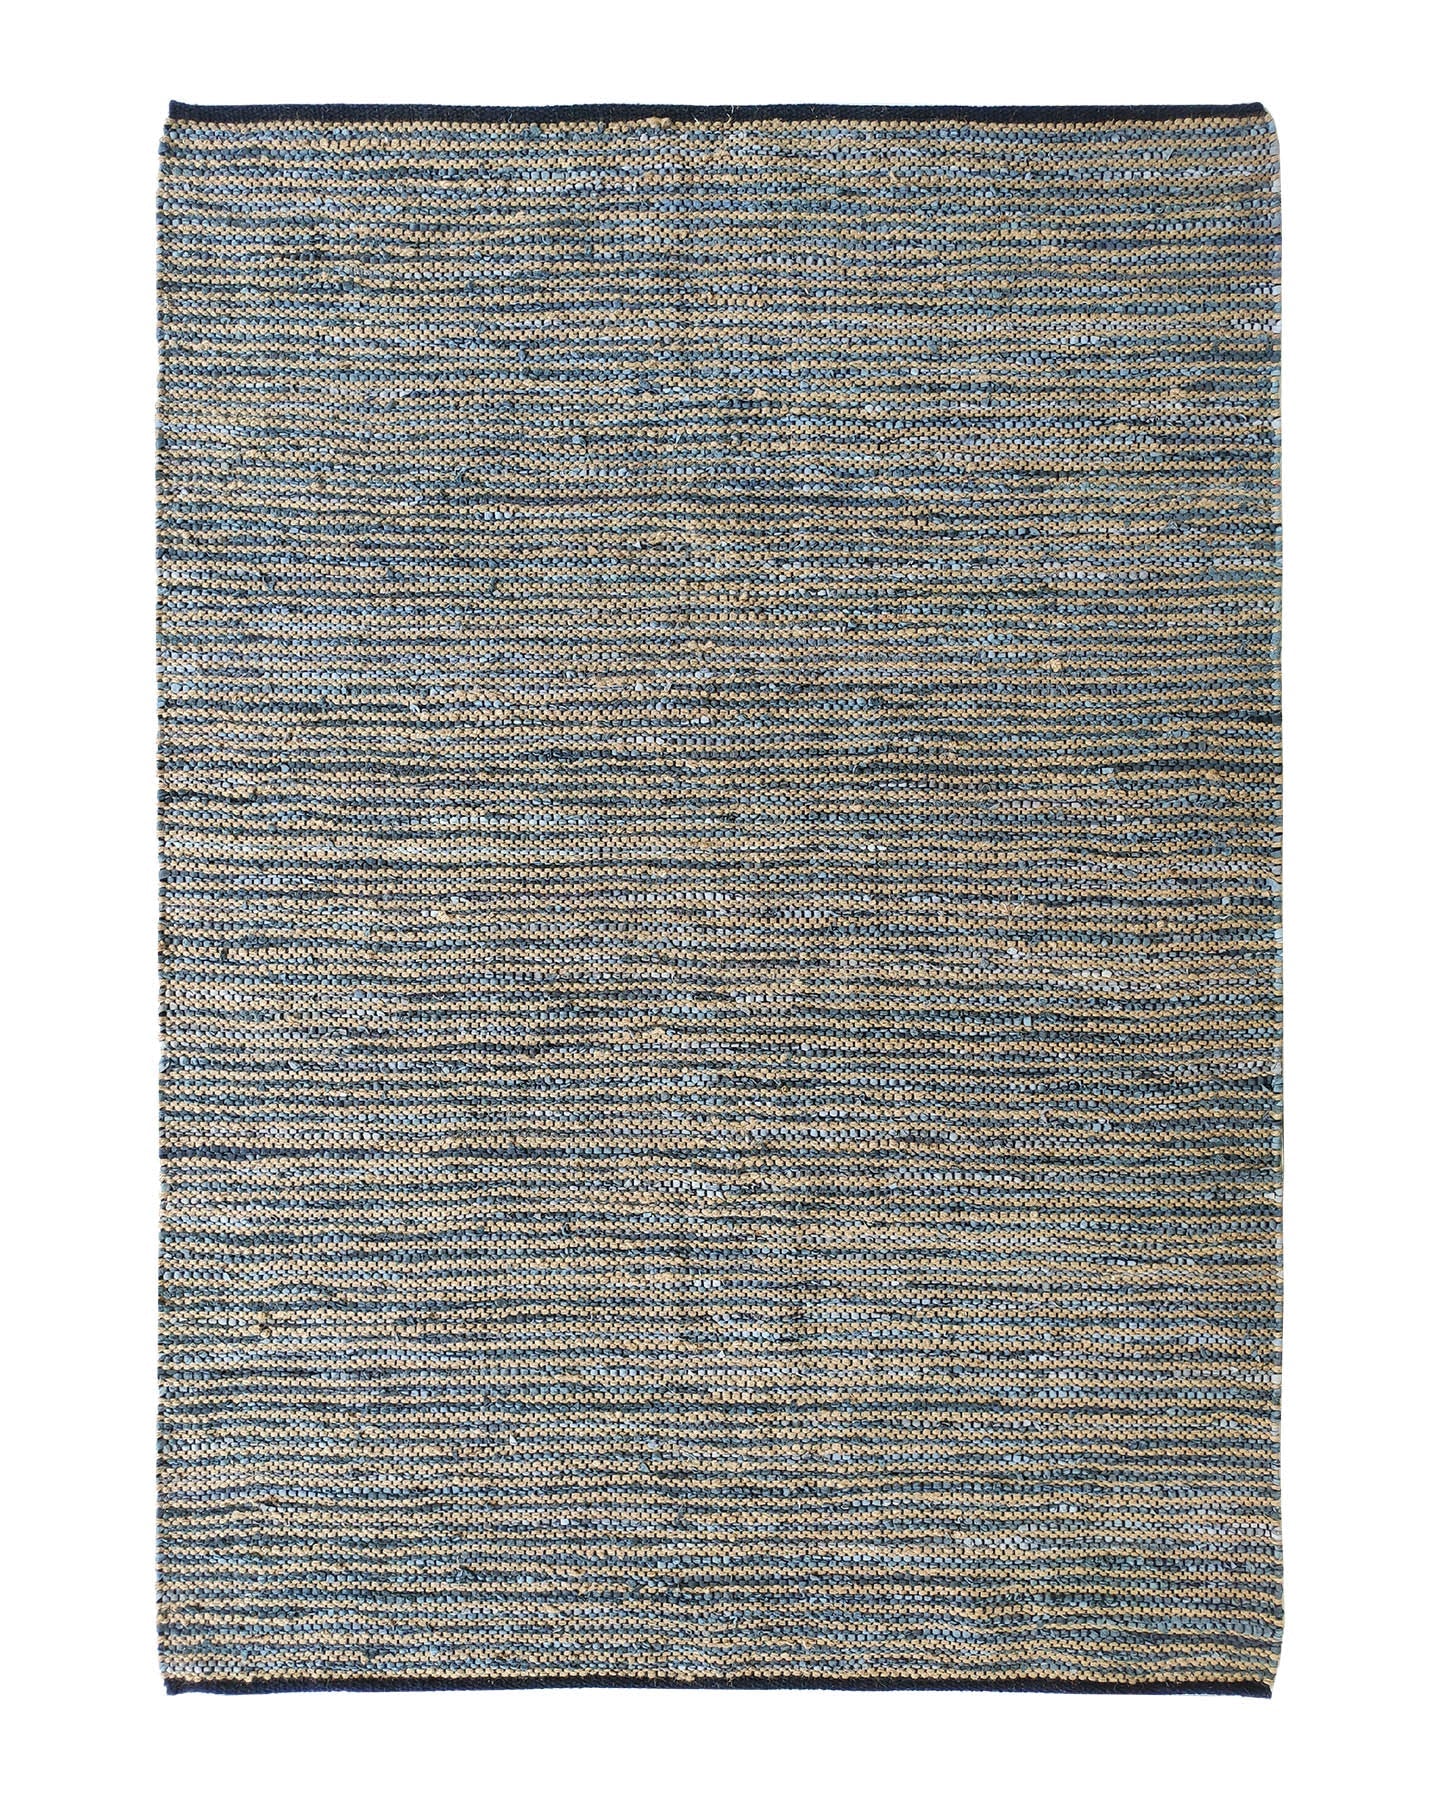 Hand Made Jute & Leather Woven Rug Multi Color (2 Sizes)